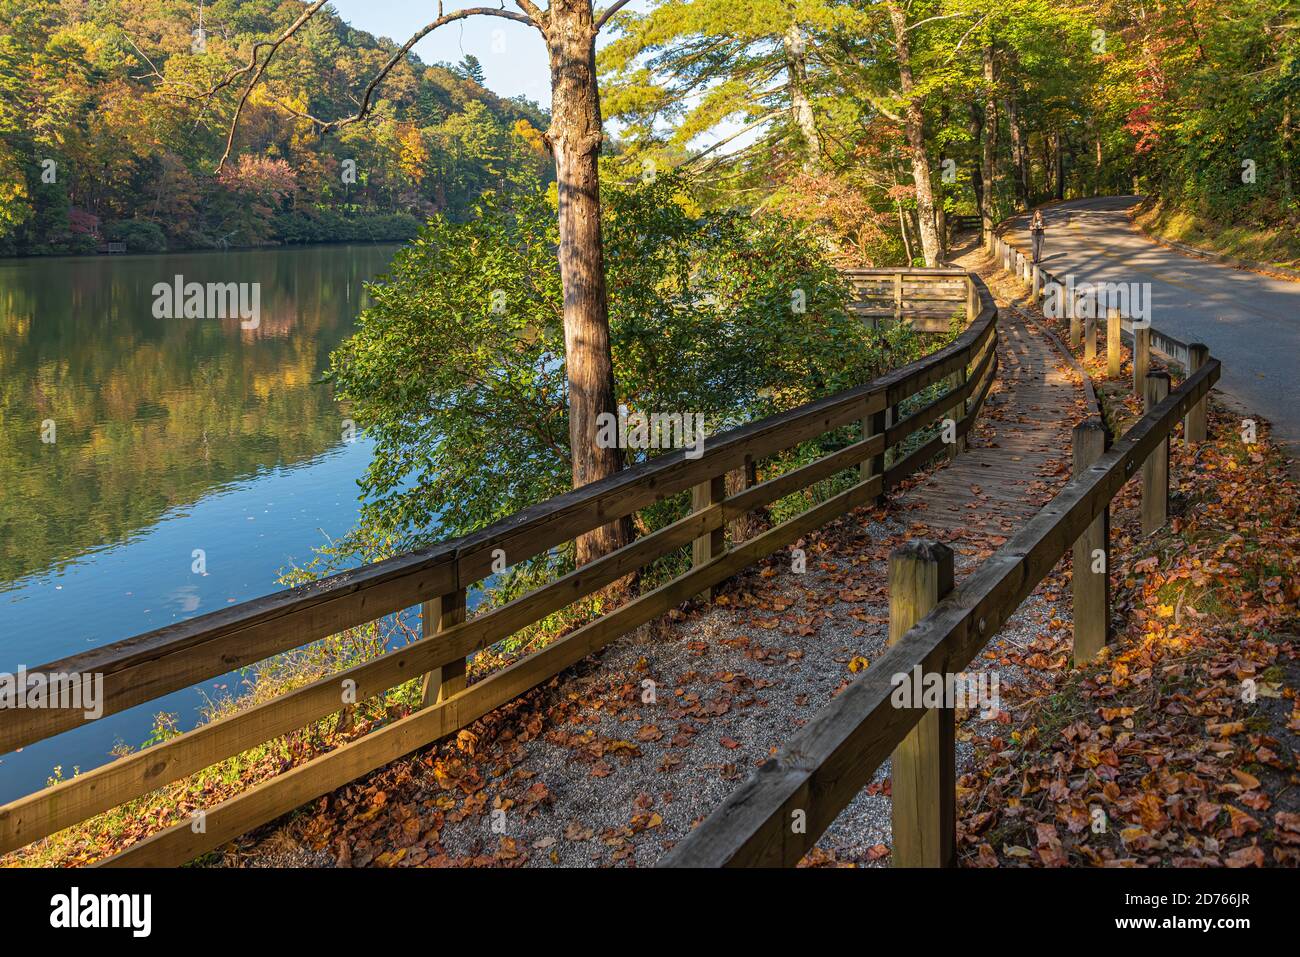 https://c8.alamy.com/comp/2D766JR/lakeside-trail-on-an-autumn-afternoon-along-lake-trahlyta-in-vogel-state-park-near-blairsville-georgia-usa-2D766JR.jpg